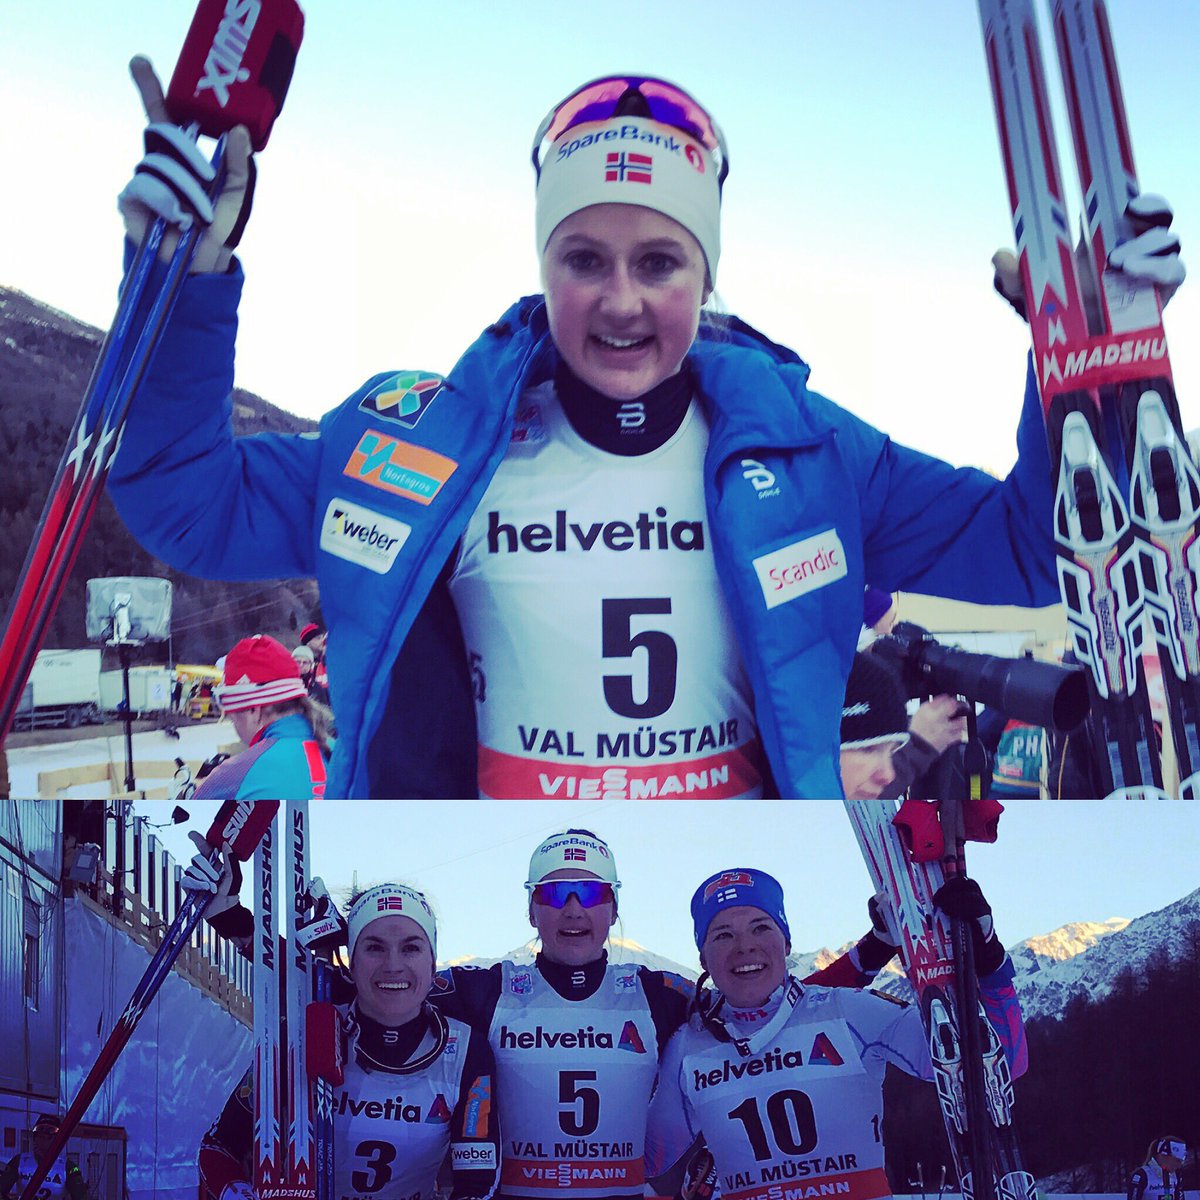 Norway's Ingvild Flugstad Østberg (top and bottom center) celebrates her win in Stage 2 of the 2017 Tour de Ski, the women's 5 k classic mass start, which she won over teammate Heidi Weng (l) and Finland's Krista Parmakoski (r). Østberg currently leads the overall Tour by more than 10 seconds over Weng with seven stages to go. (Photo: FIS Cross Country/Twitter)